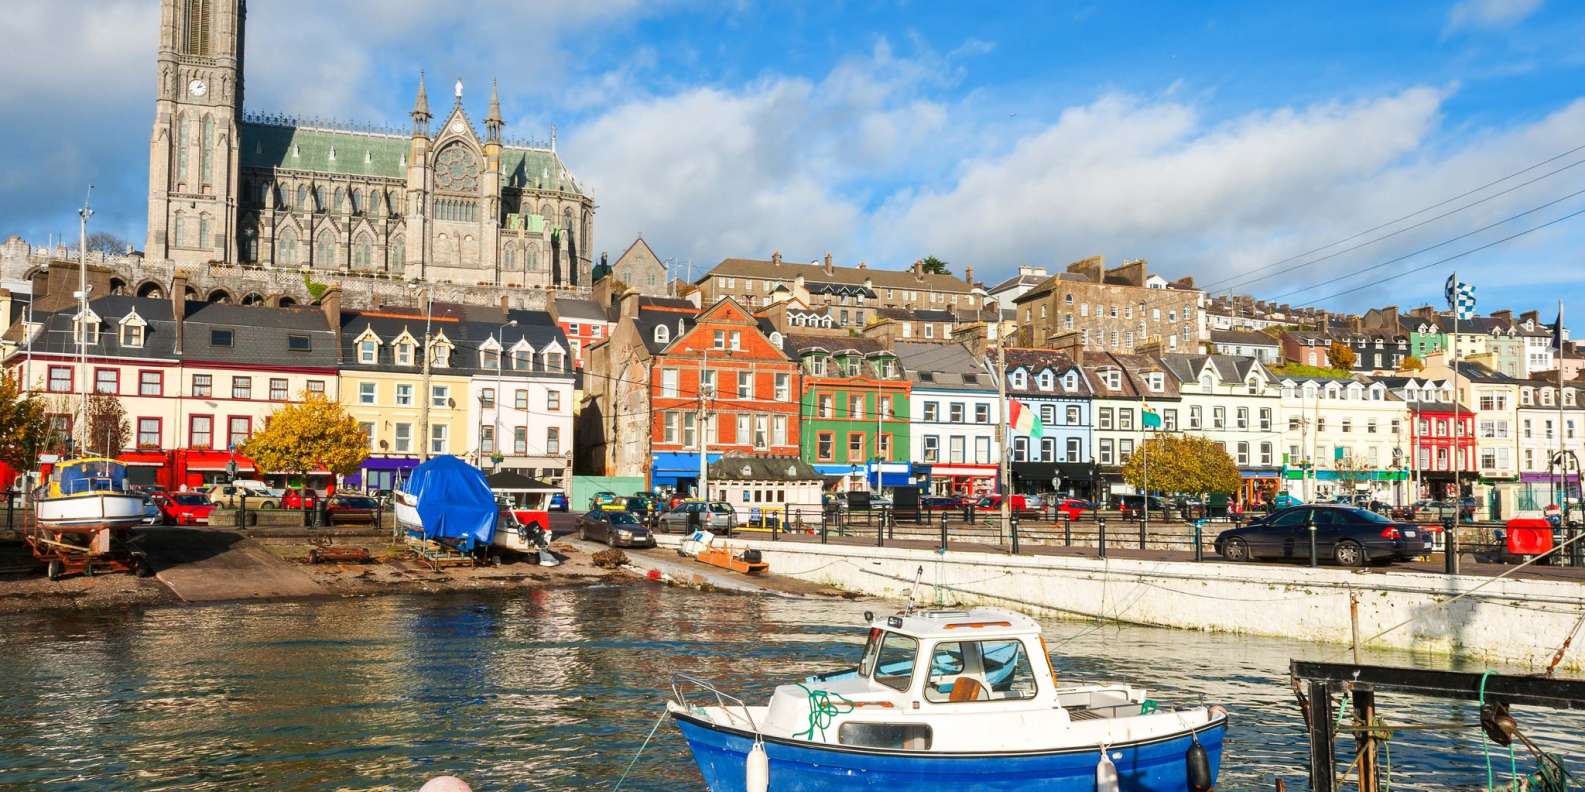 The BEST Cork Wheelchair accessible 2023 FREE Cancellation GetYourGuide